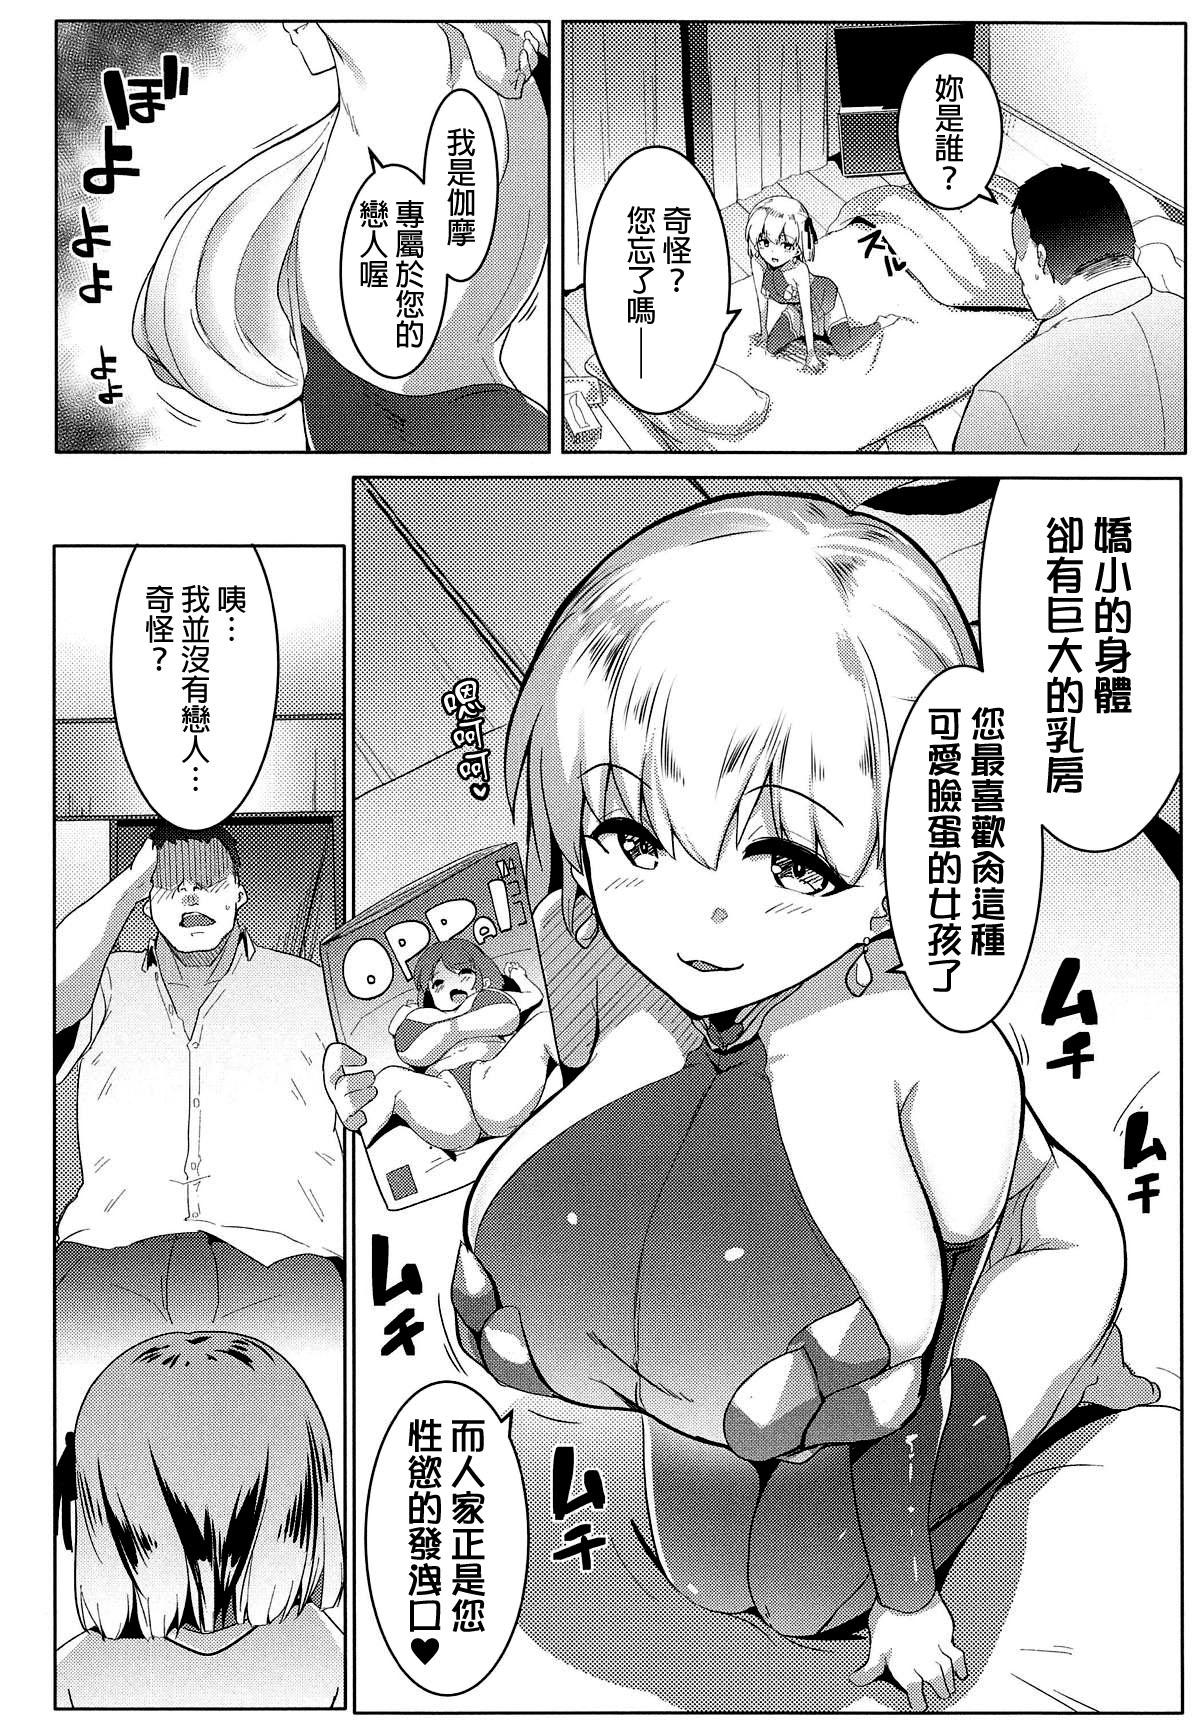 Indoor Hame Kama - Fate grand order Consolo - Page 5